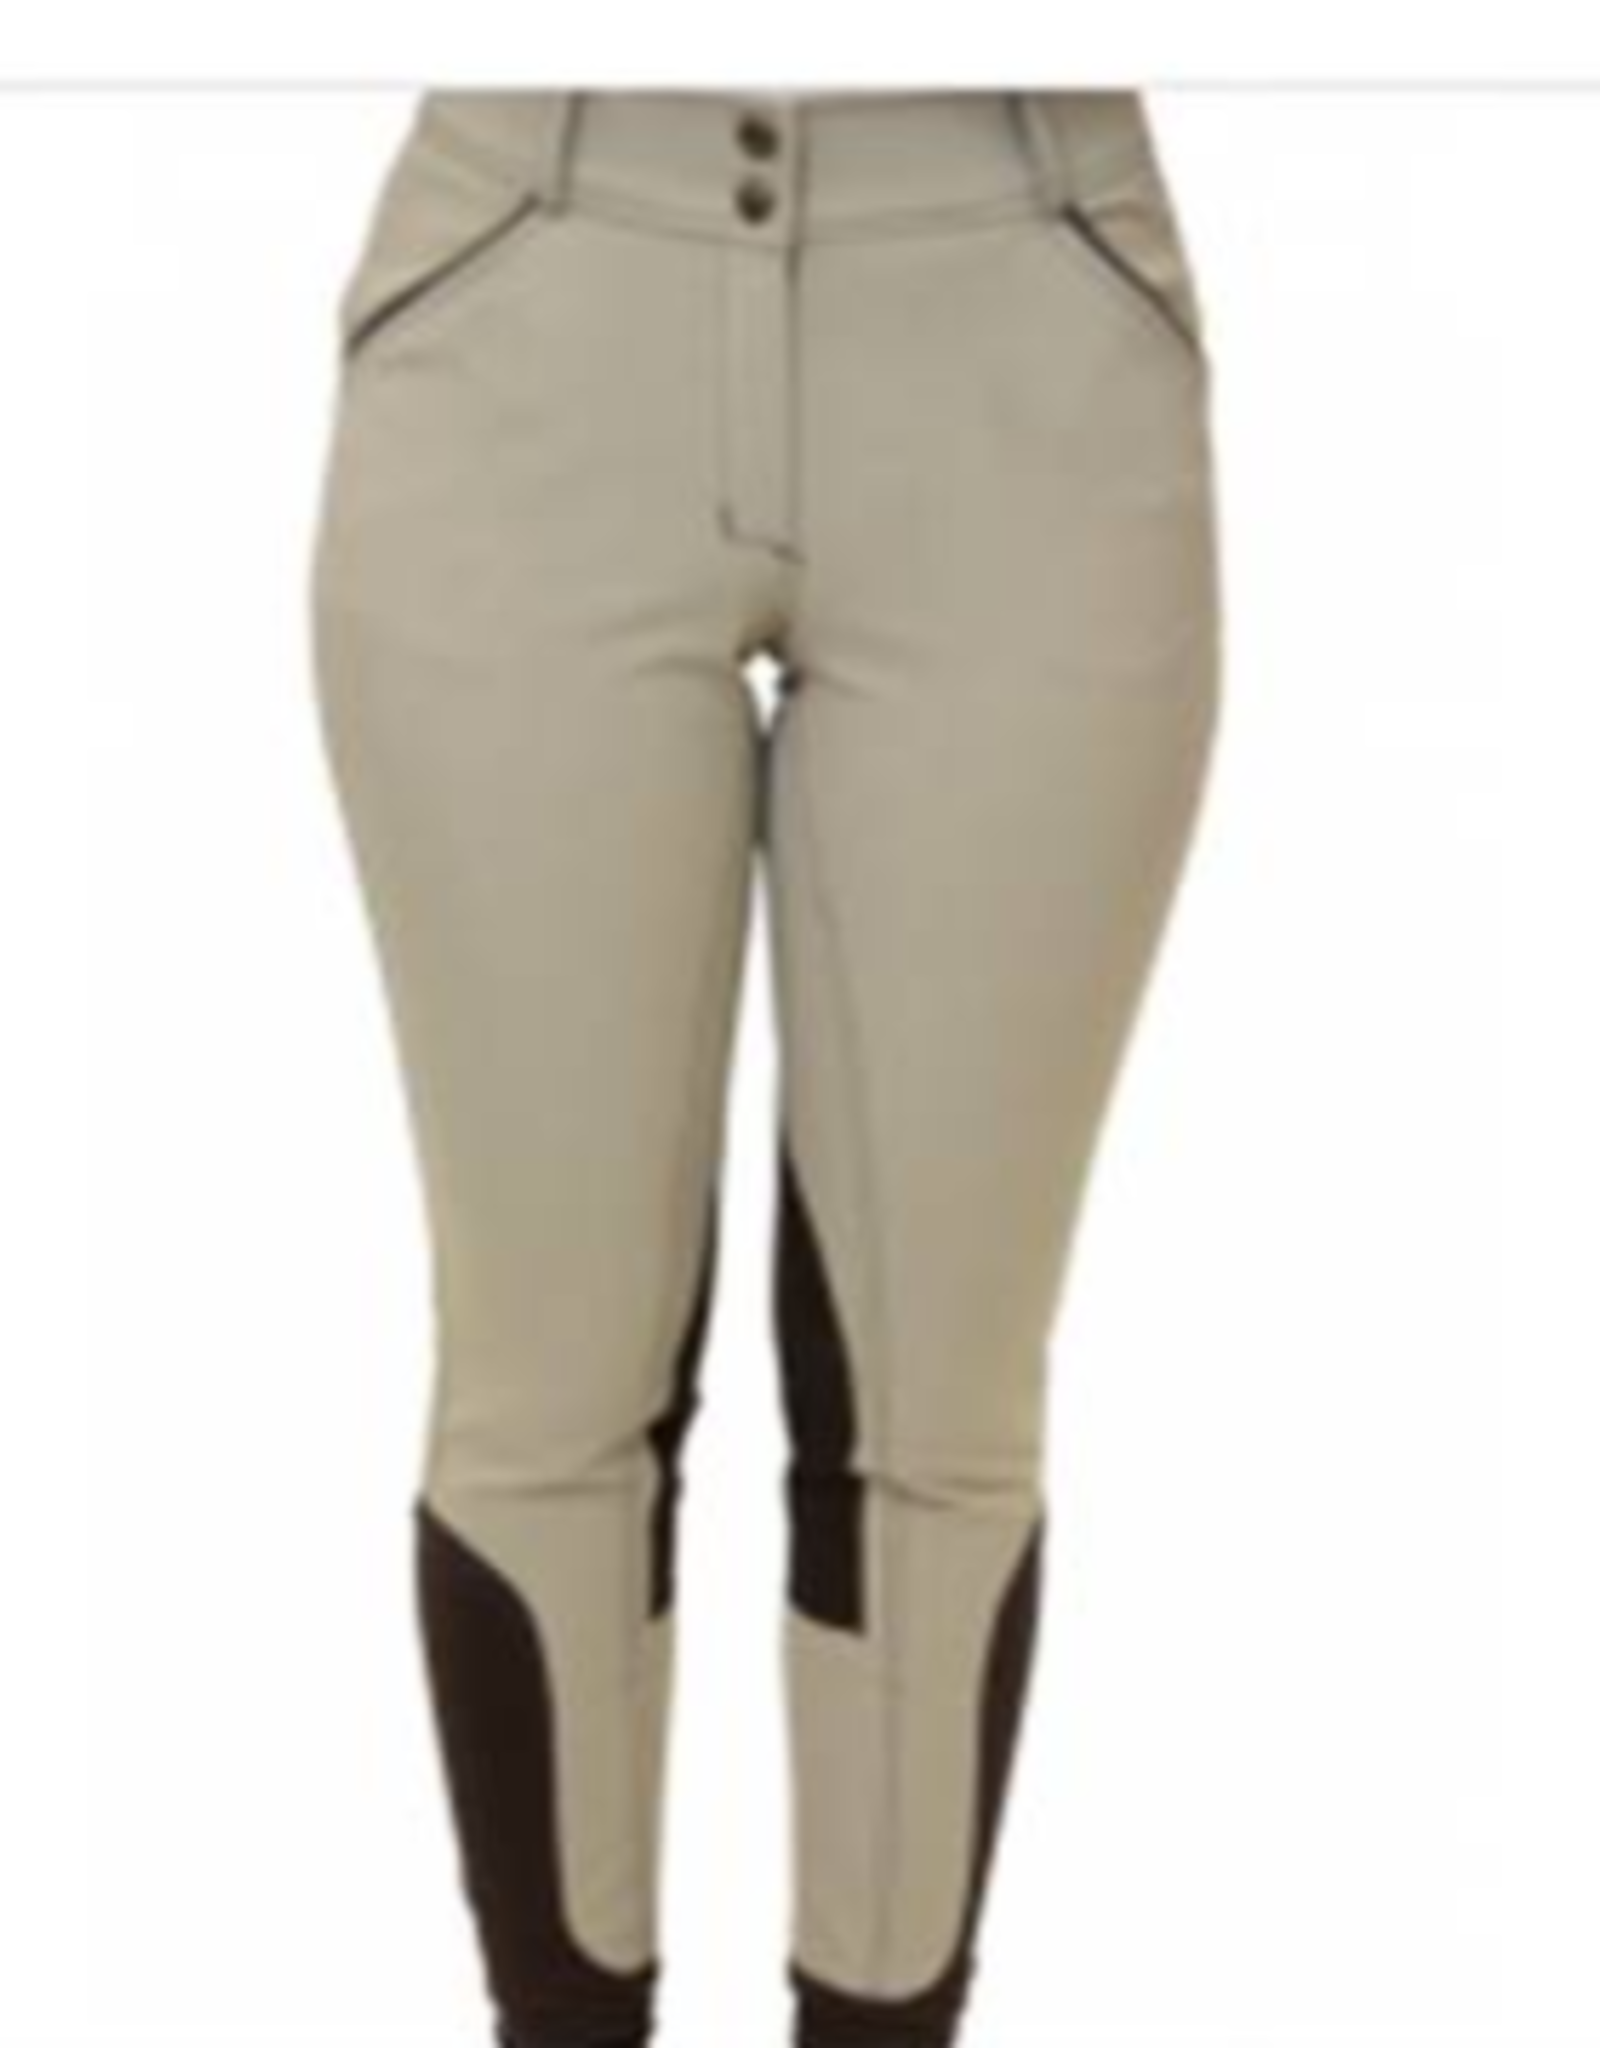 Royal Highness Contrast Piping Knee Patch Breech